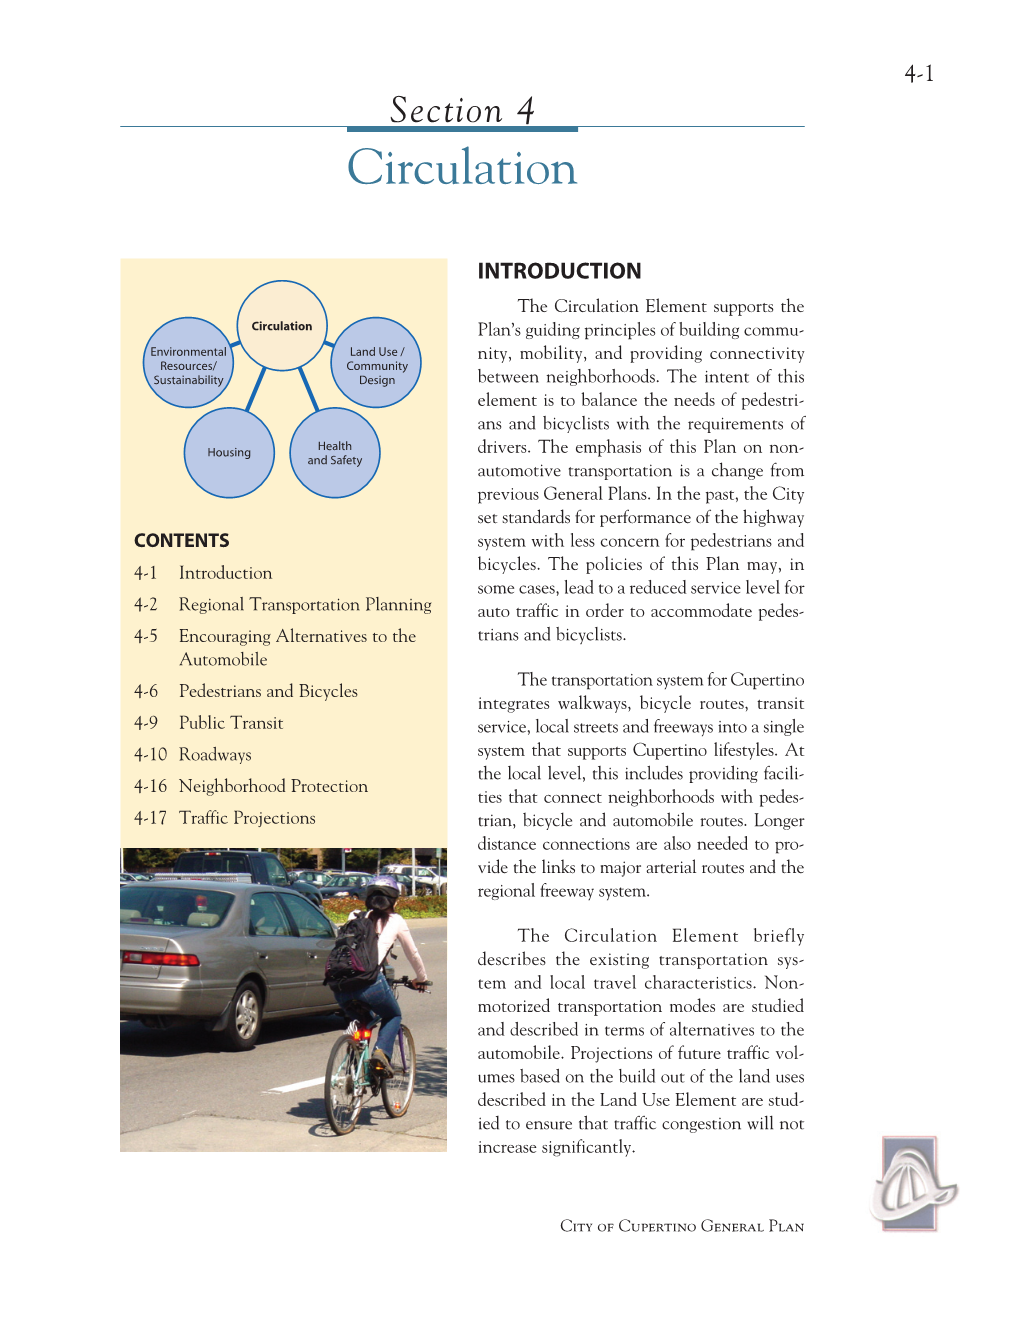 Circulation Community Housing and Safety Design